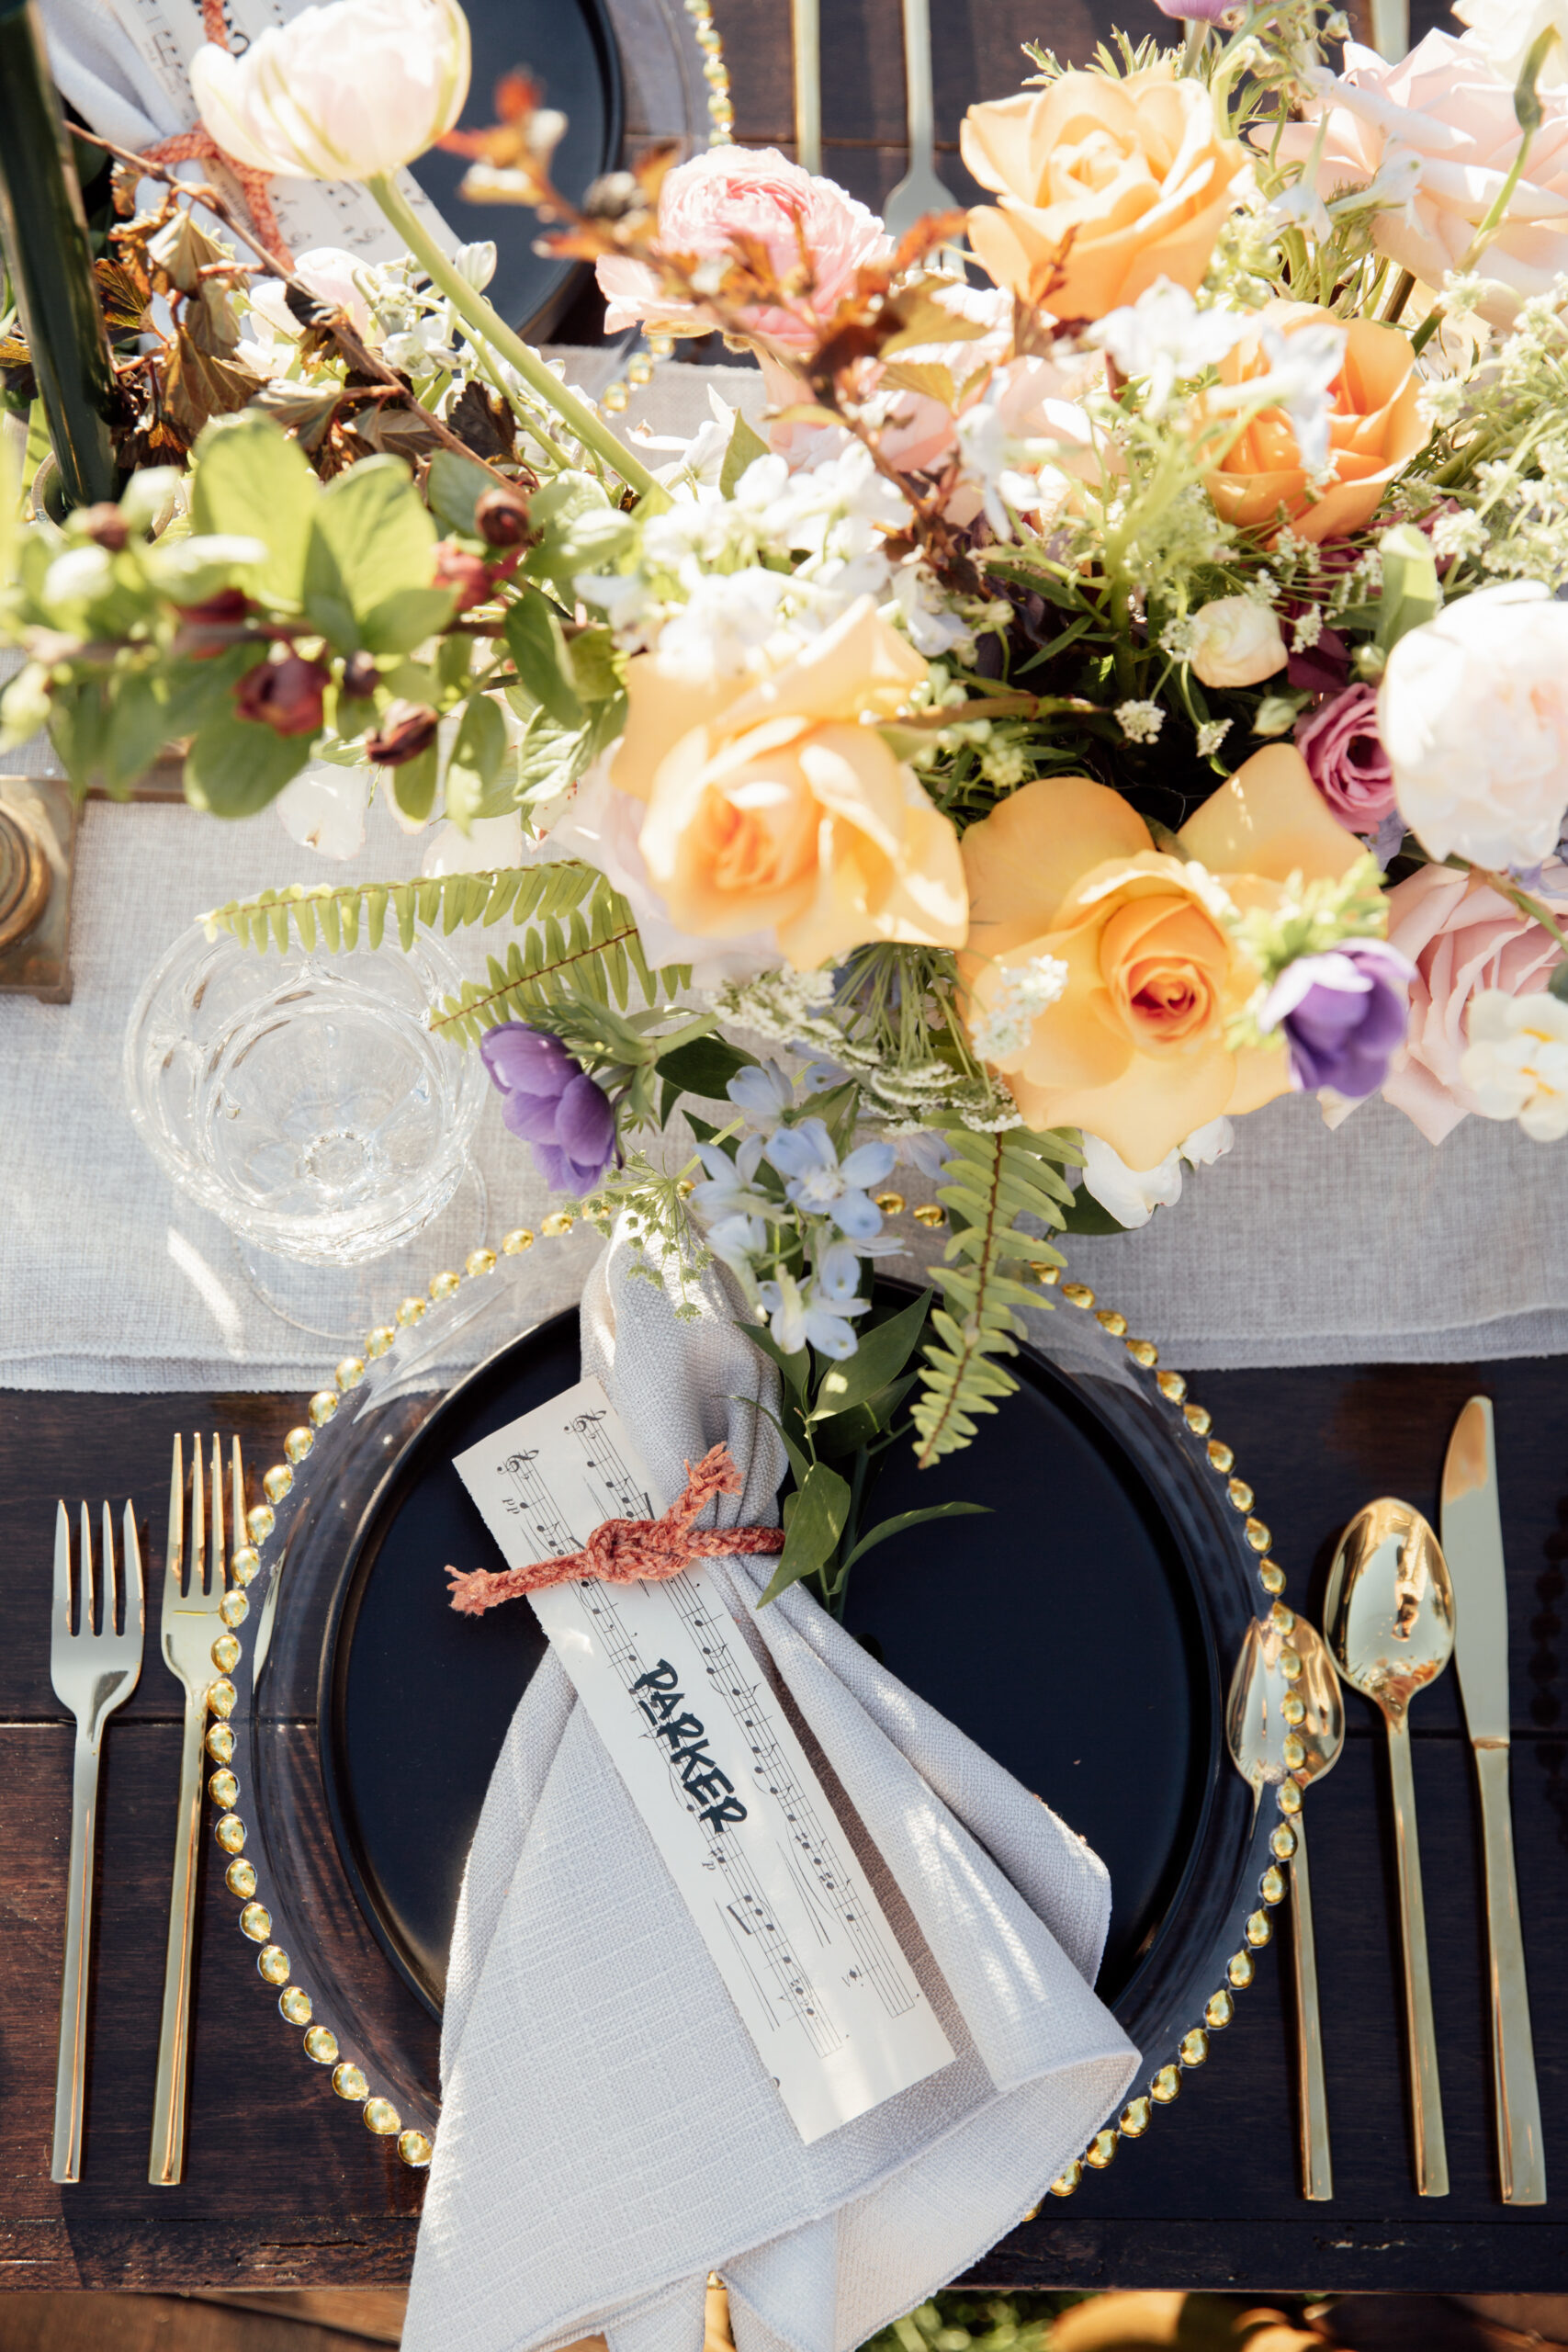 Image of tabletop setting using Gold beaded rim chargers, black stoneware plates, Primrose gold flatware, and clear vintage goblets